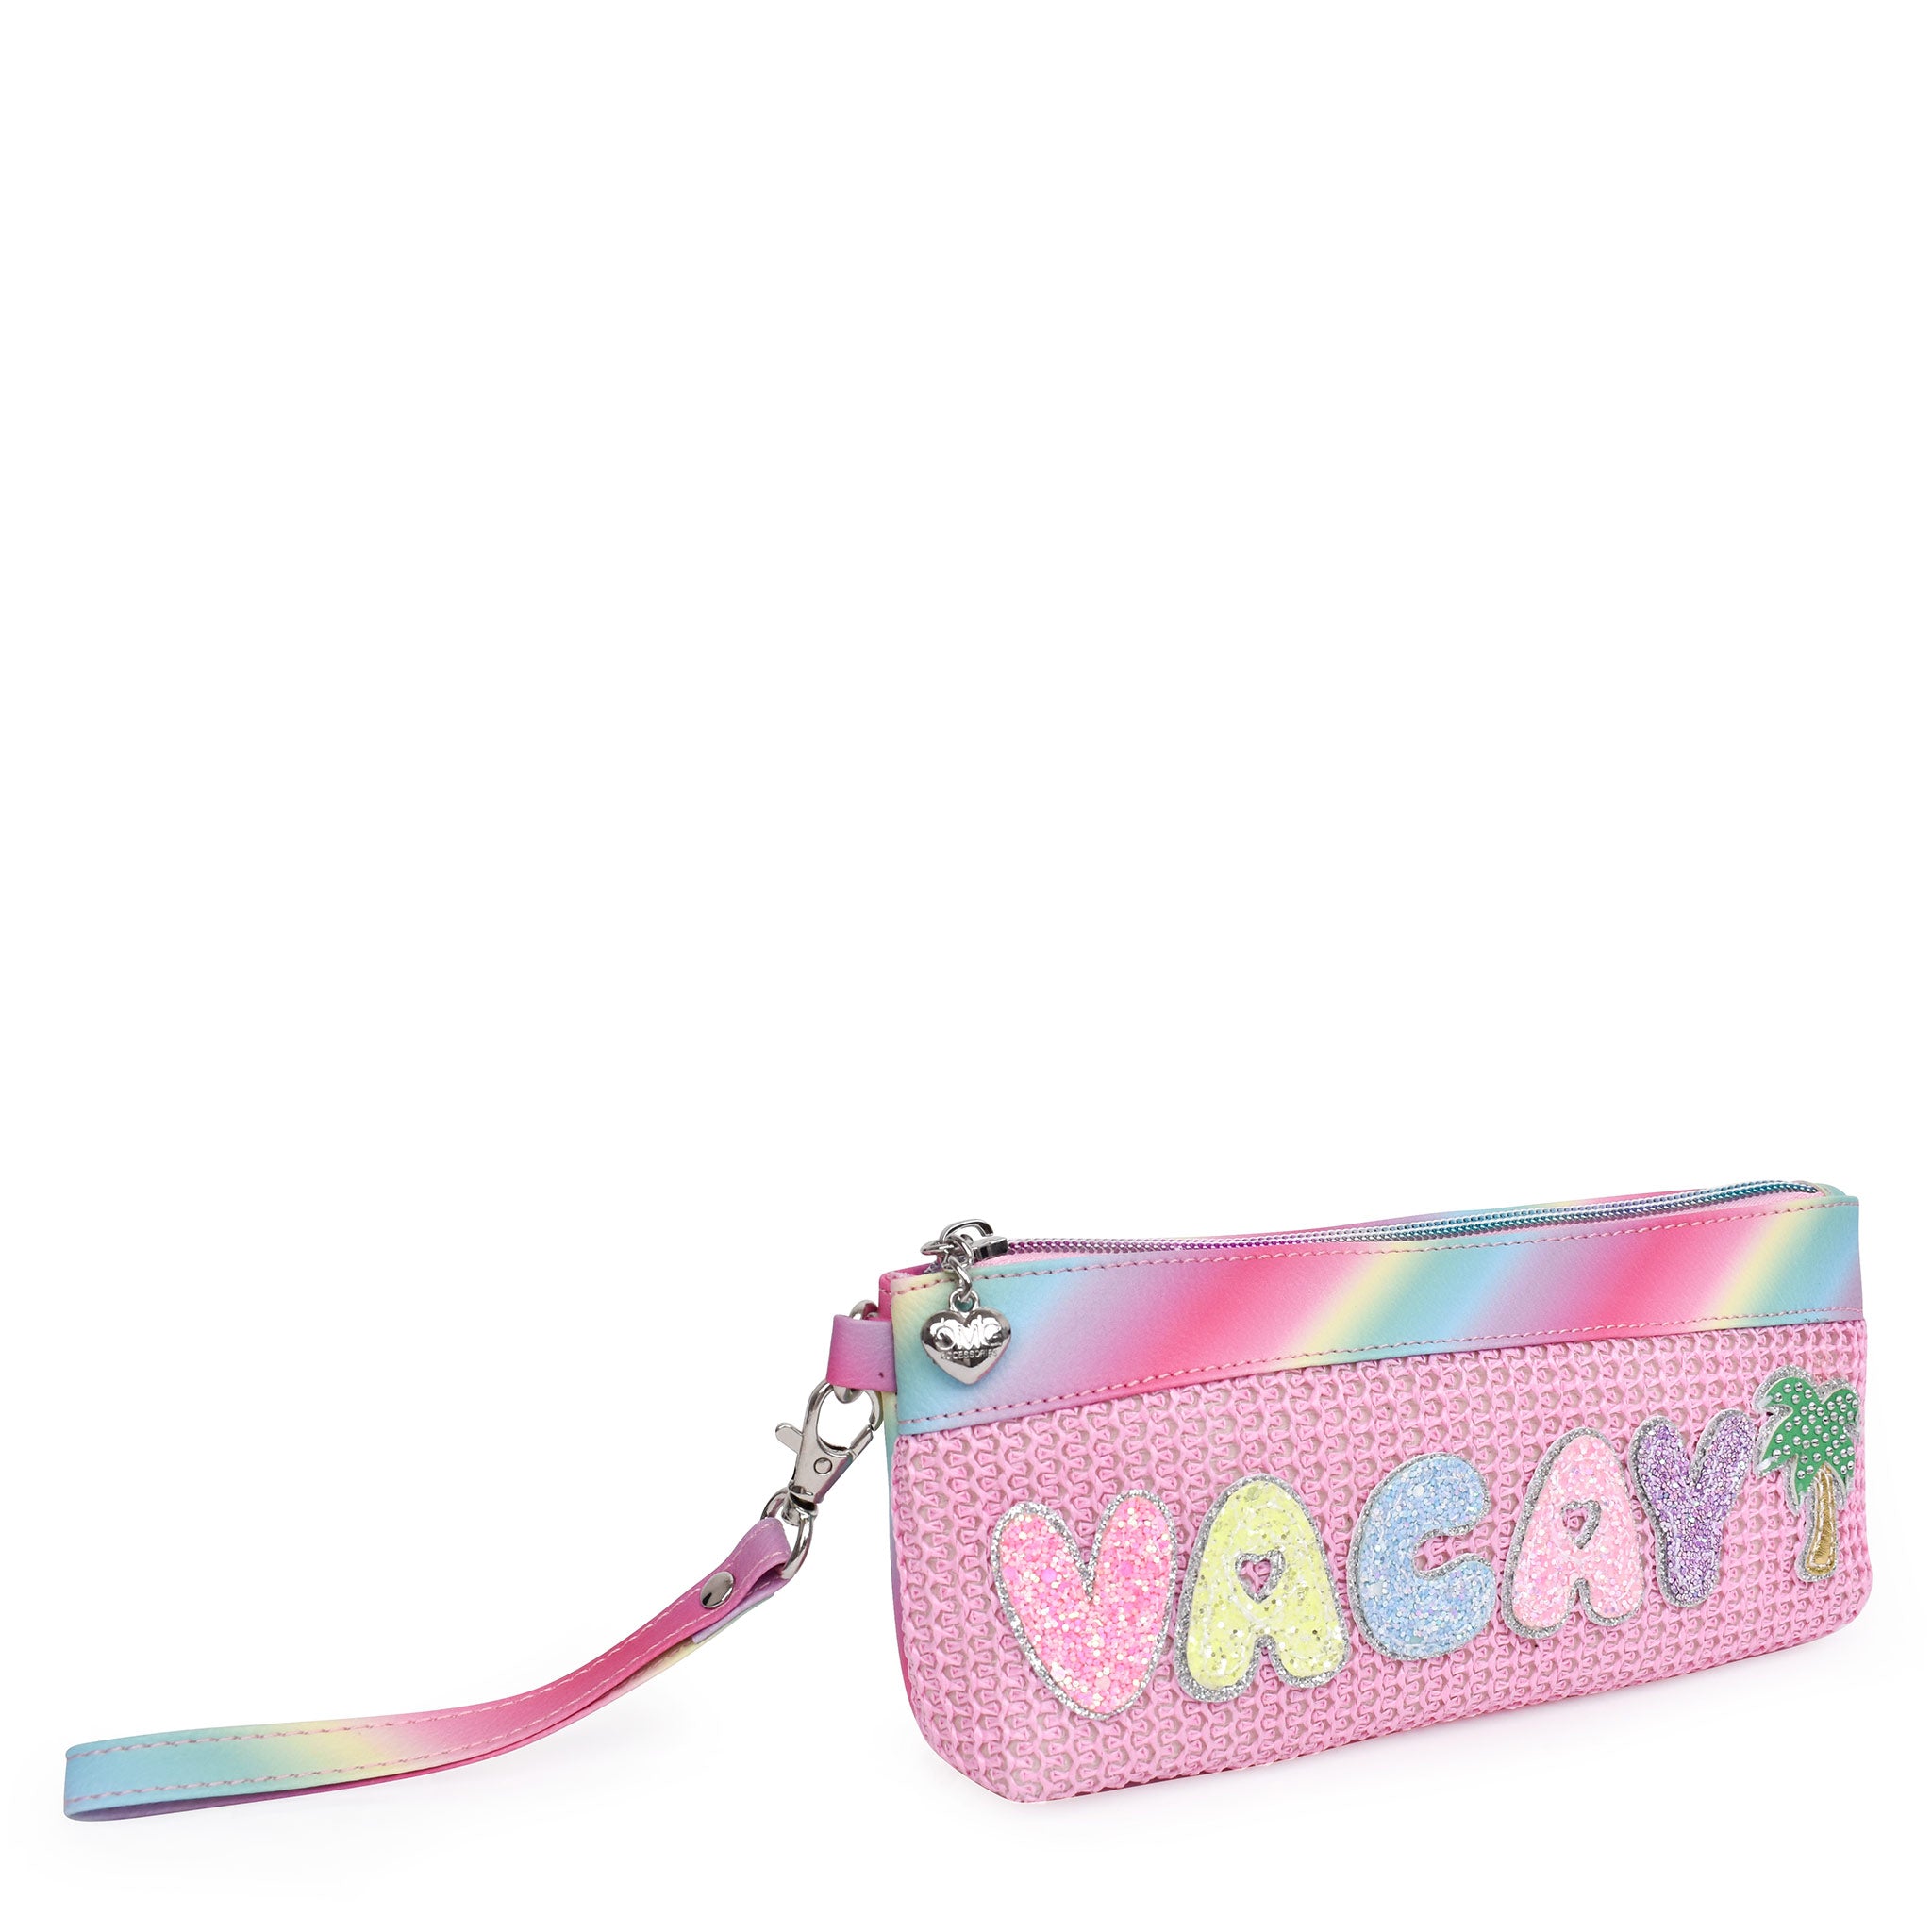 Side view of pink straw pencil case wristlet with glitter bubble letters 'VACAY' and palm tree appliqués